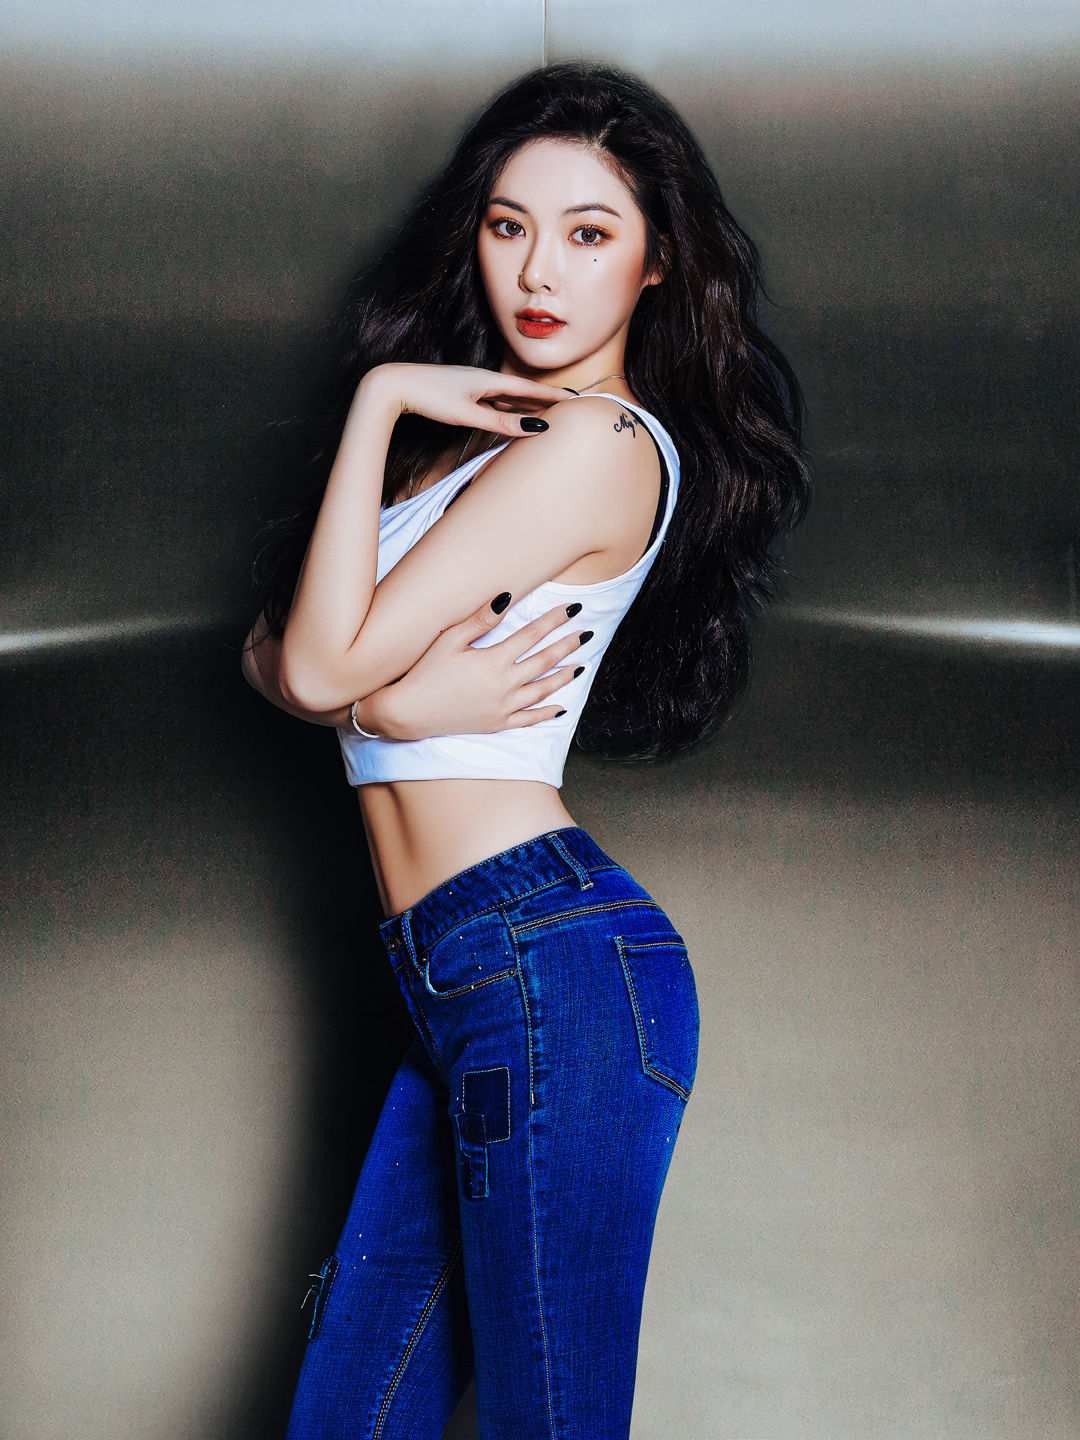 10+ K-Pop Girls Who look Hottest In Jeans - Koreaboo1080 x 1440